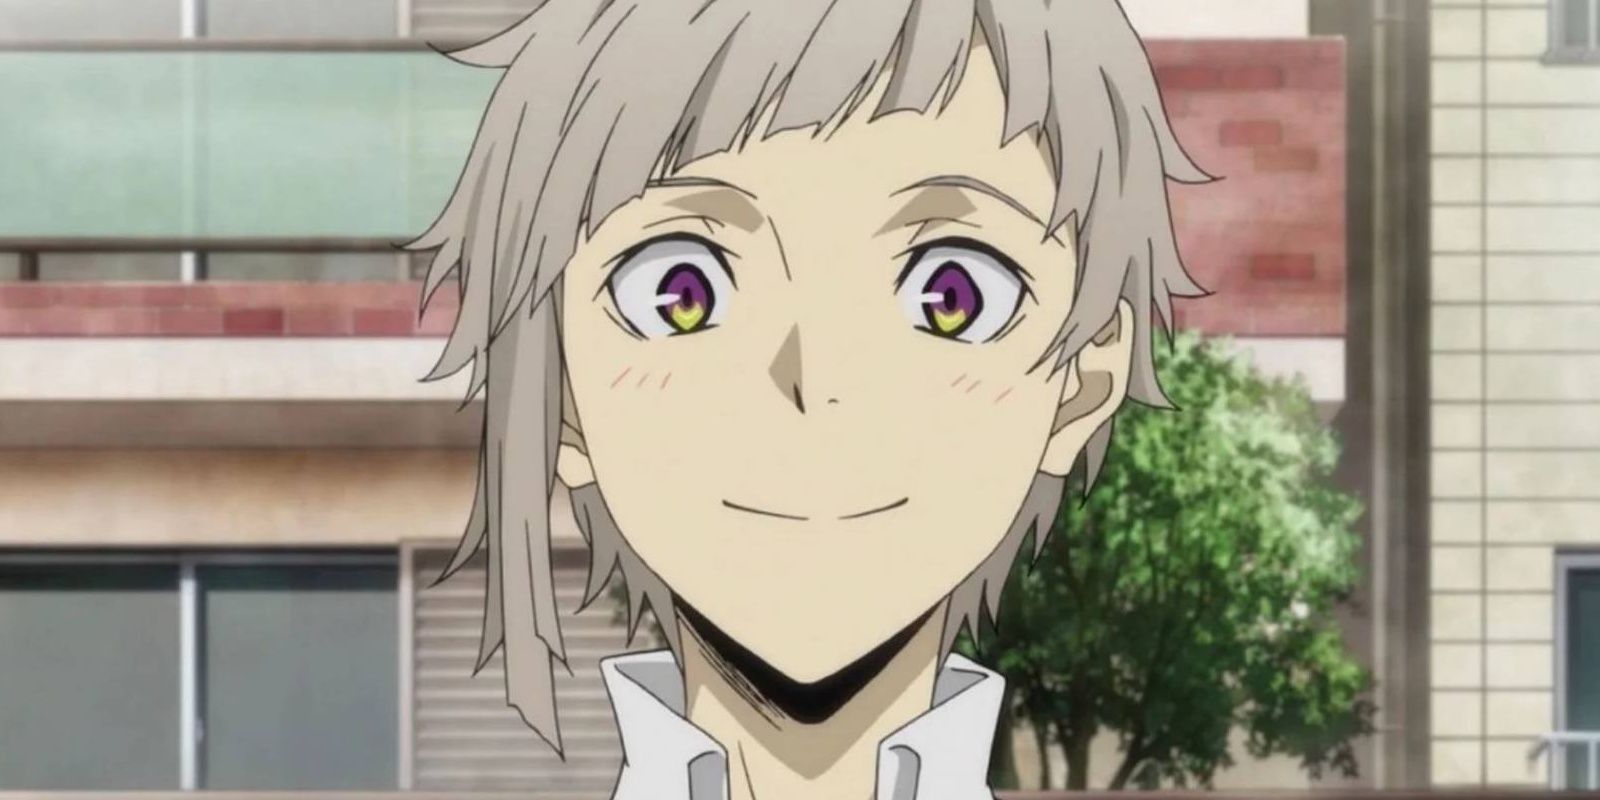 Atsushi from Bungou Stray Dogs Smiling